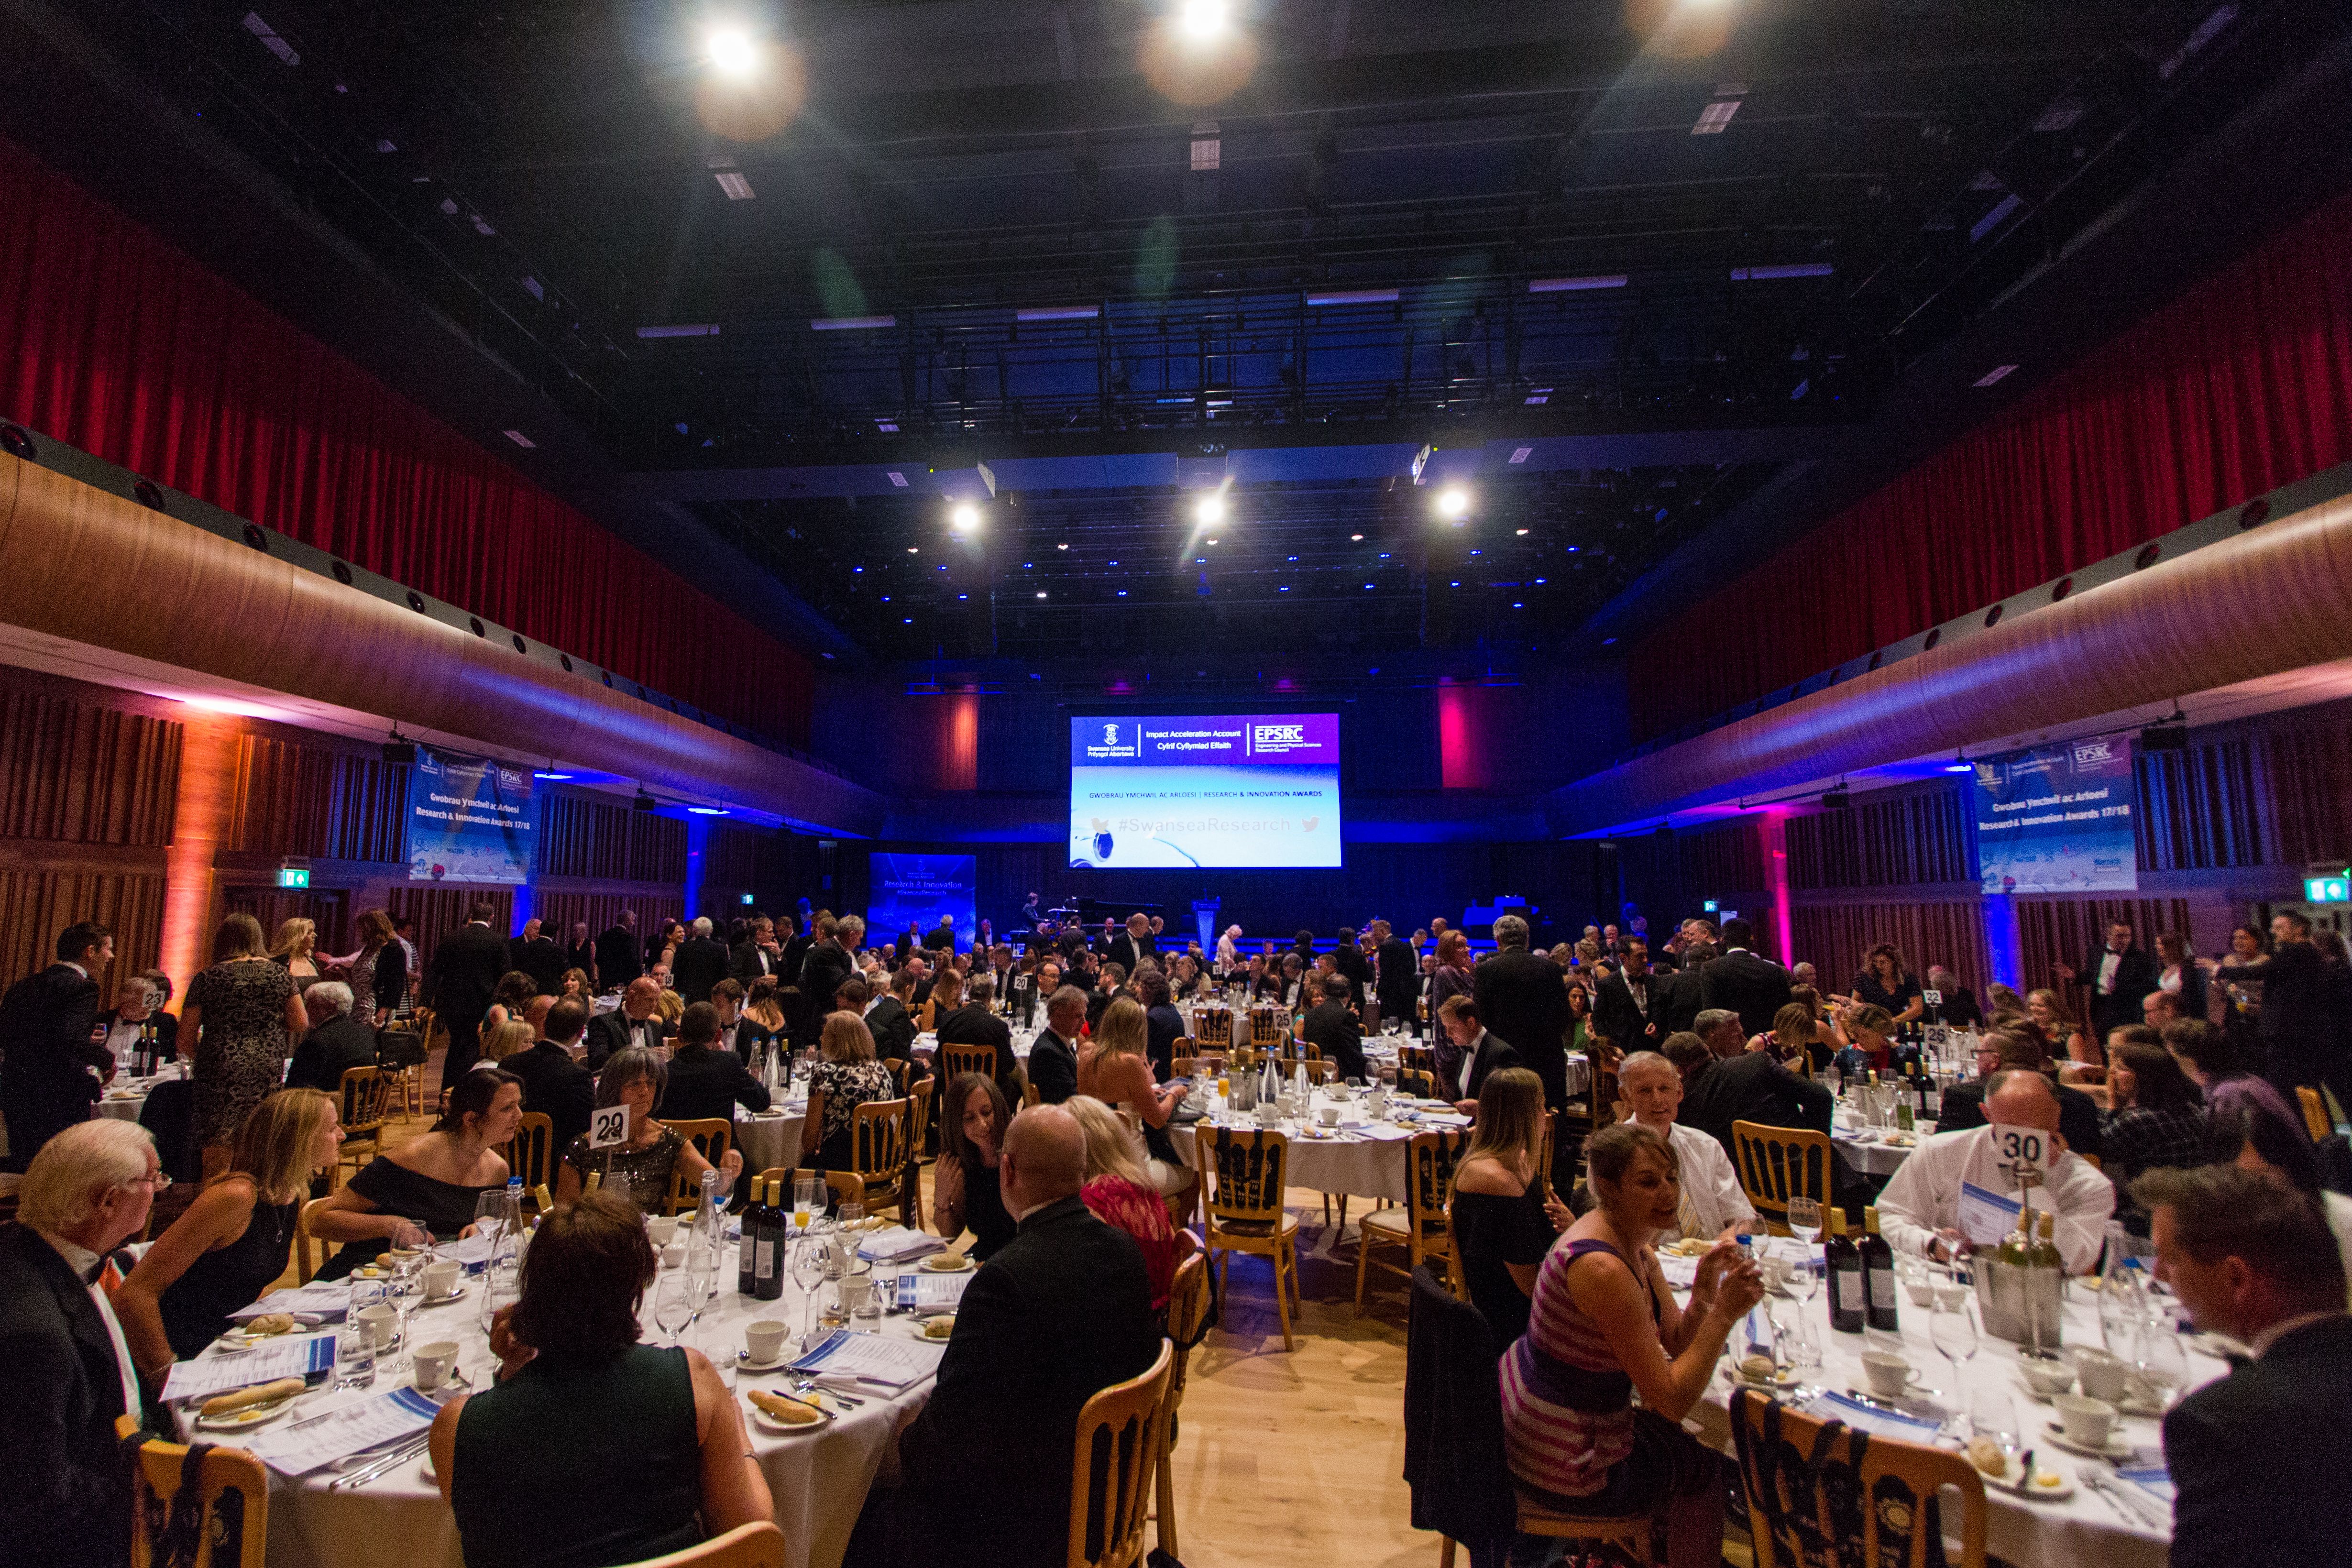 Swansea University is your ideal event venue in South Wales